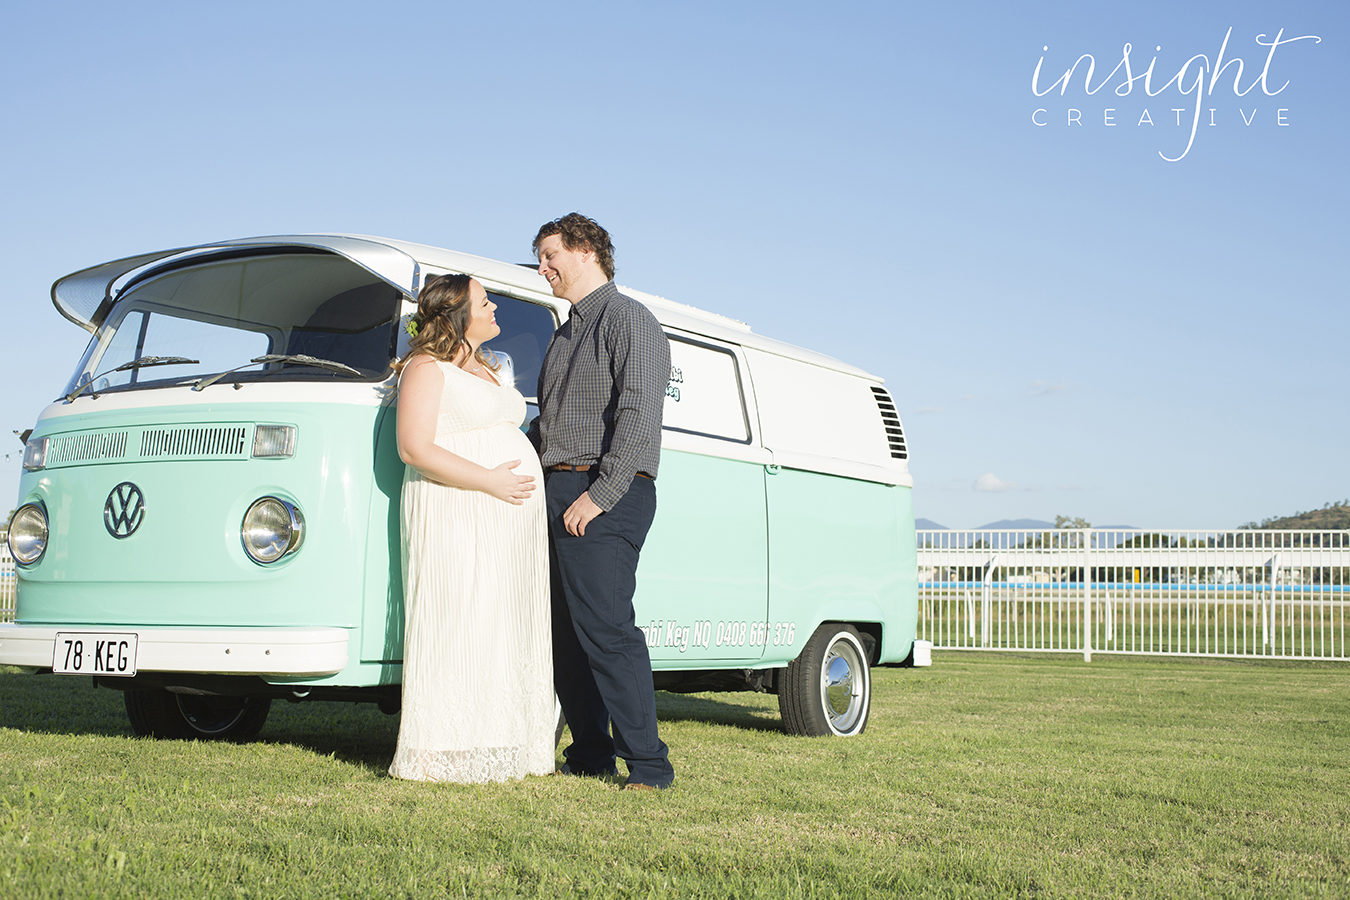 couple photography shot by Townsville photographer Megan Marano from Insight Creative